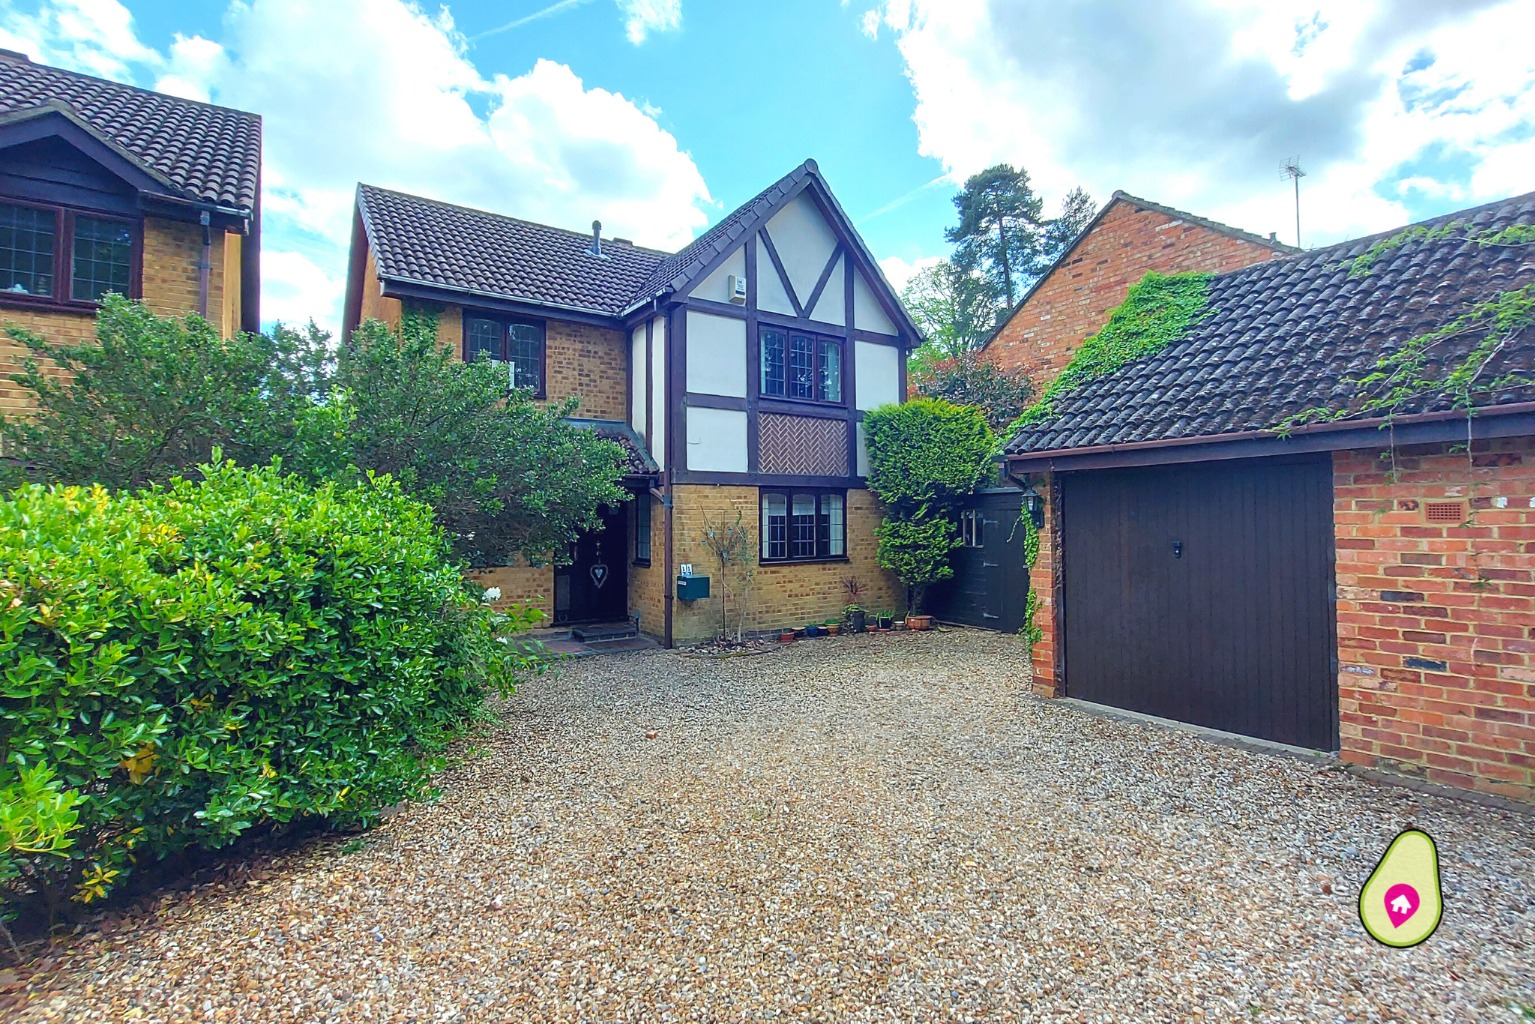 This impressive four bedroom detached house is coming to the market in the popular Pine Ridge development. The offers some great space whilst also giving the opportunity to put put your own stamp on. If you're looking for a great family home, we would love to show you around!